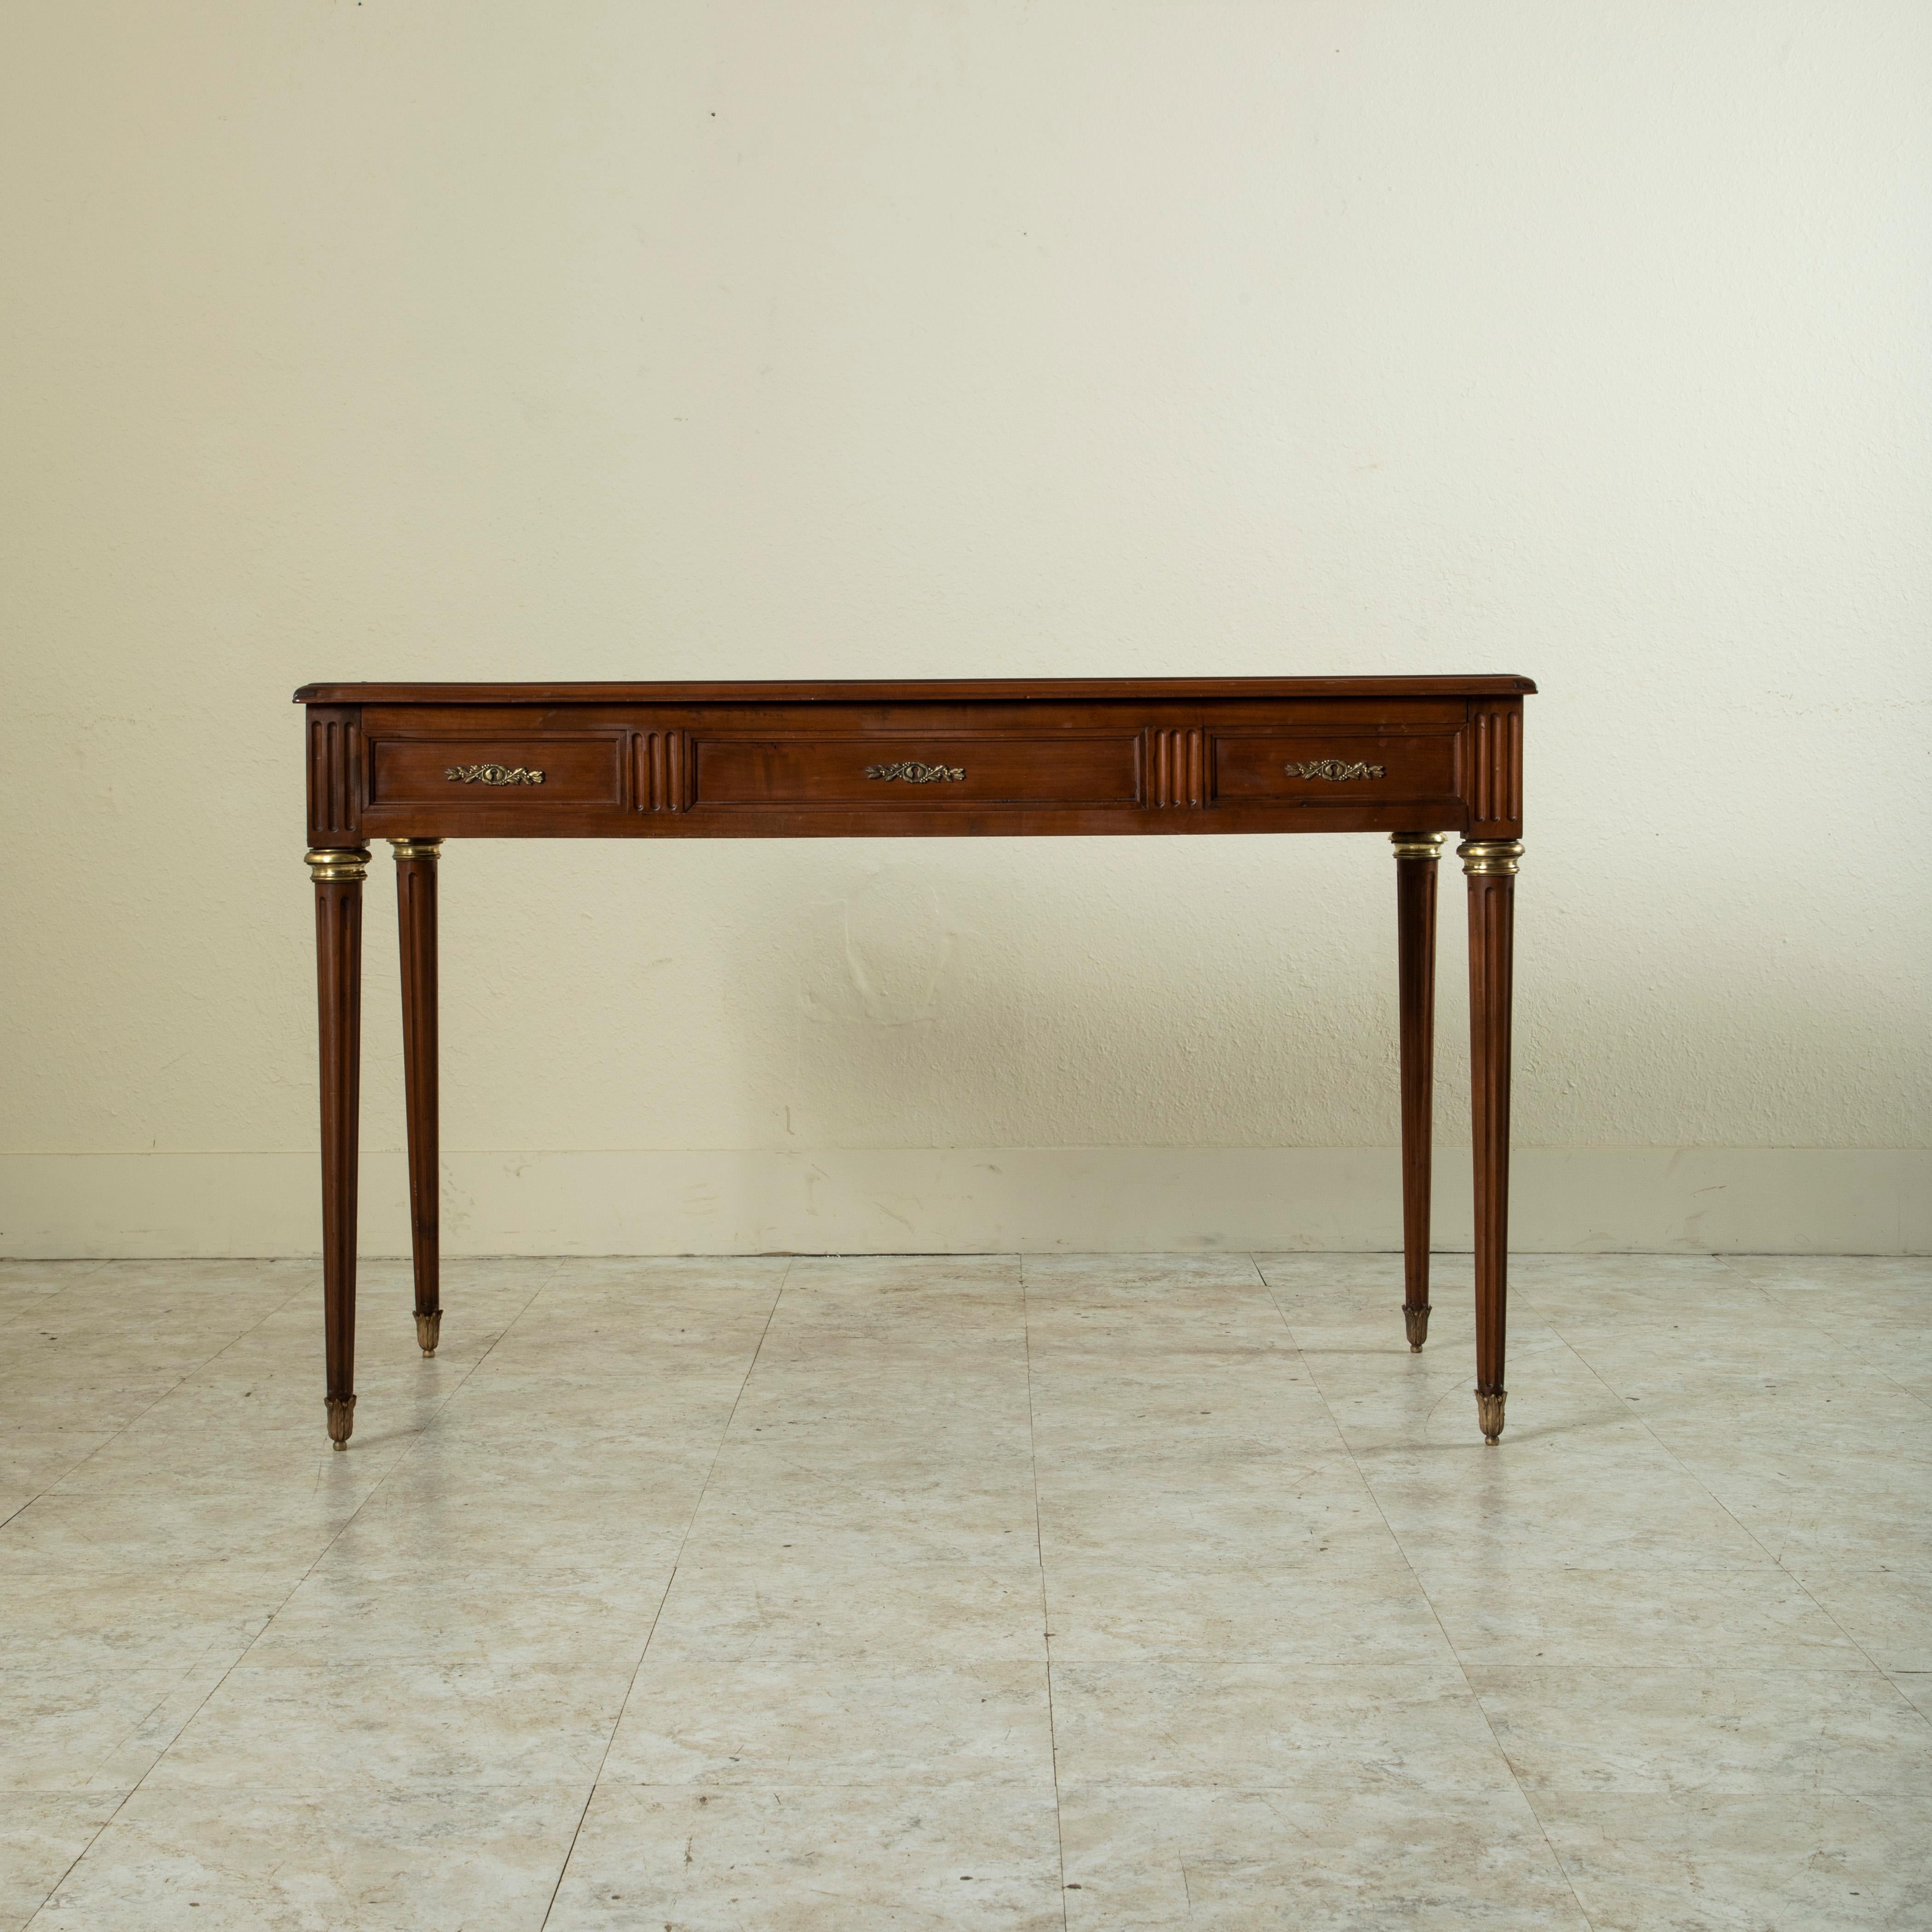 Early 20th Century French Louis XVI Style Cherrywood Desk, Tooled Leather Top 1